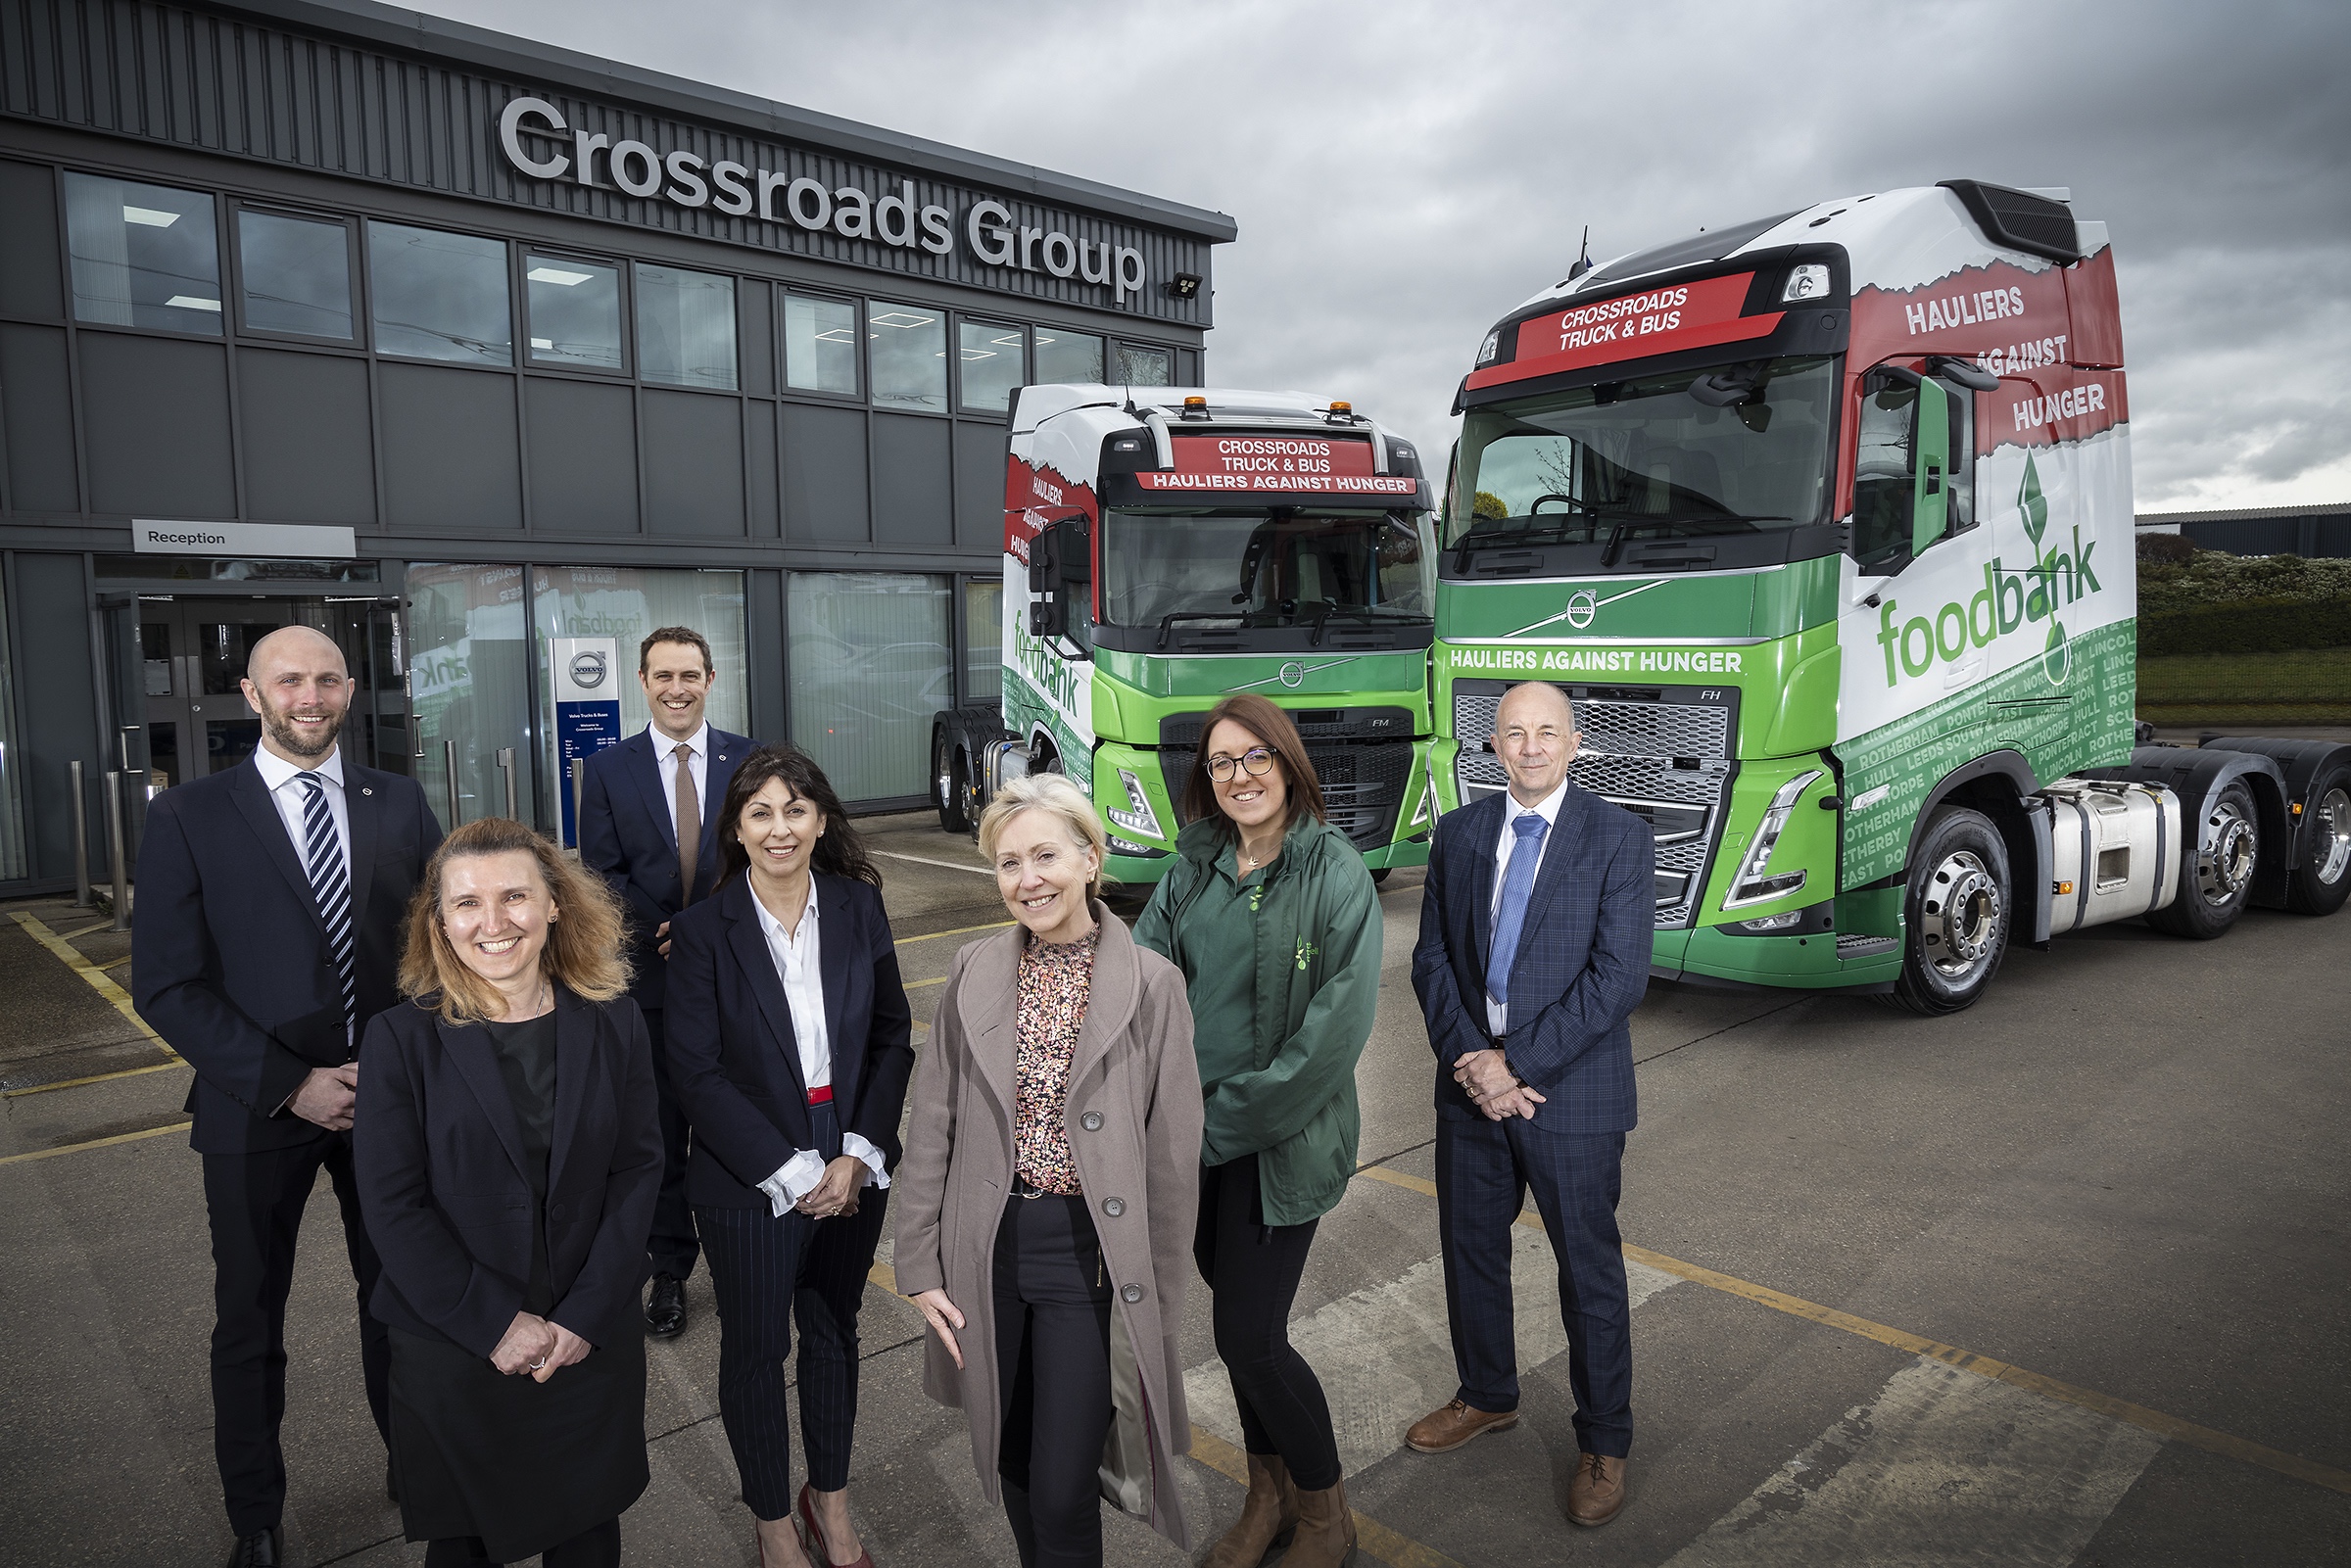 Gareth Legg (2nd from left) with Laura Chalmers (6th from left) with Crossroads staff and food bank volunteers in Rotherham. Photo 2 shows the Crossroads demonstrator trucks in Hauliers Against Hunger livery.  Issued by W1 Features on behalf of Crossroads.